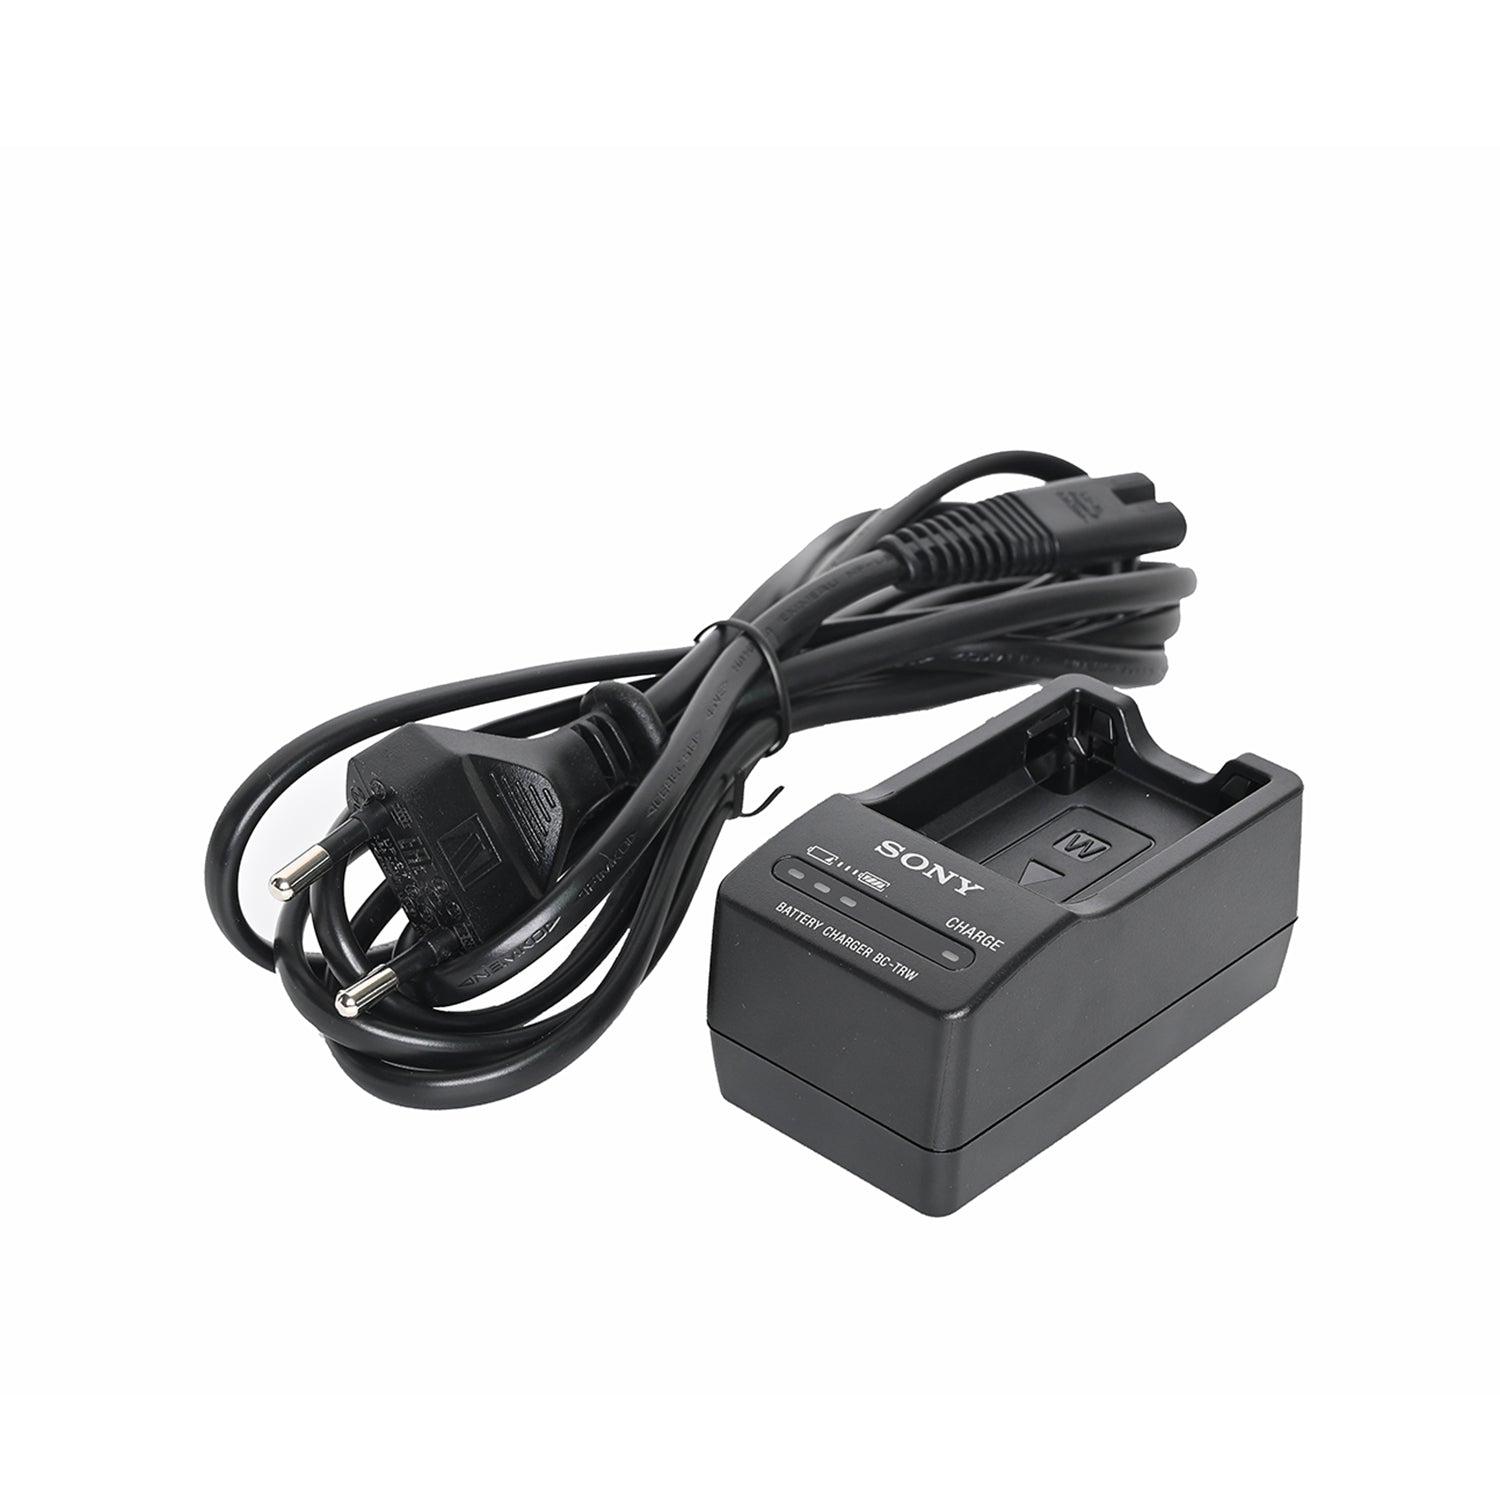 Sony Battery Charger BC-TRW – Specialist